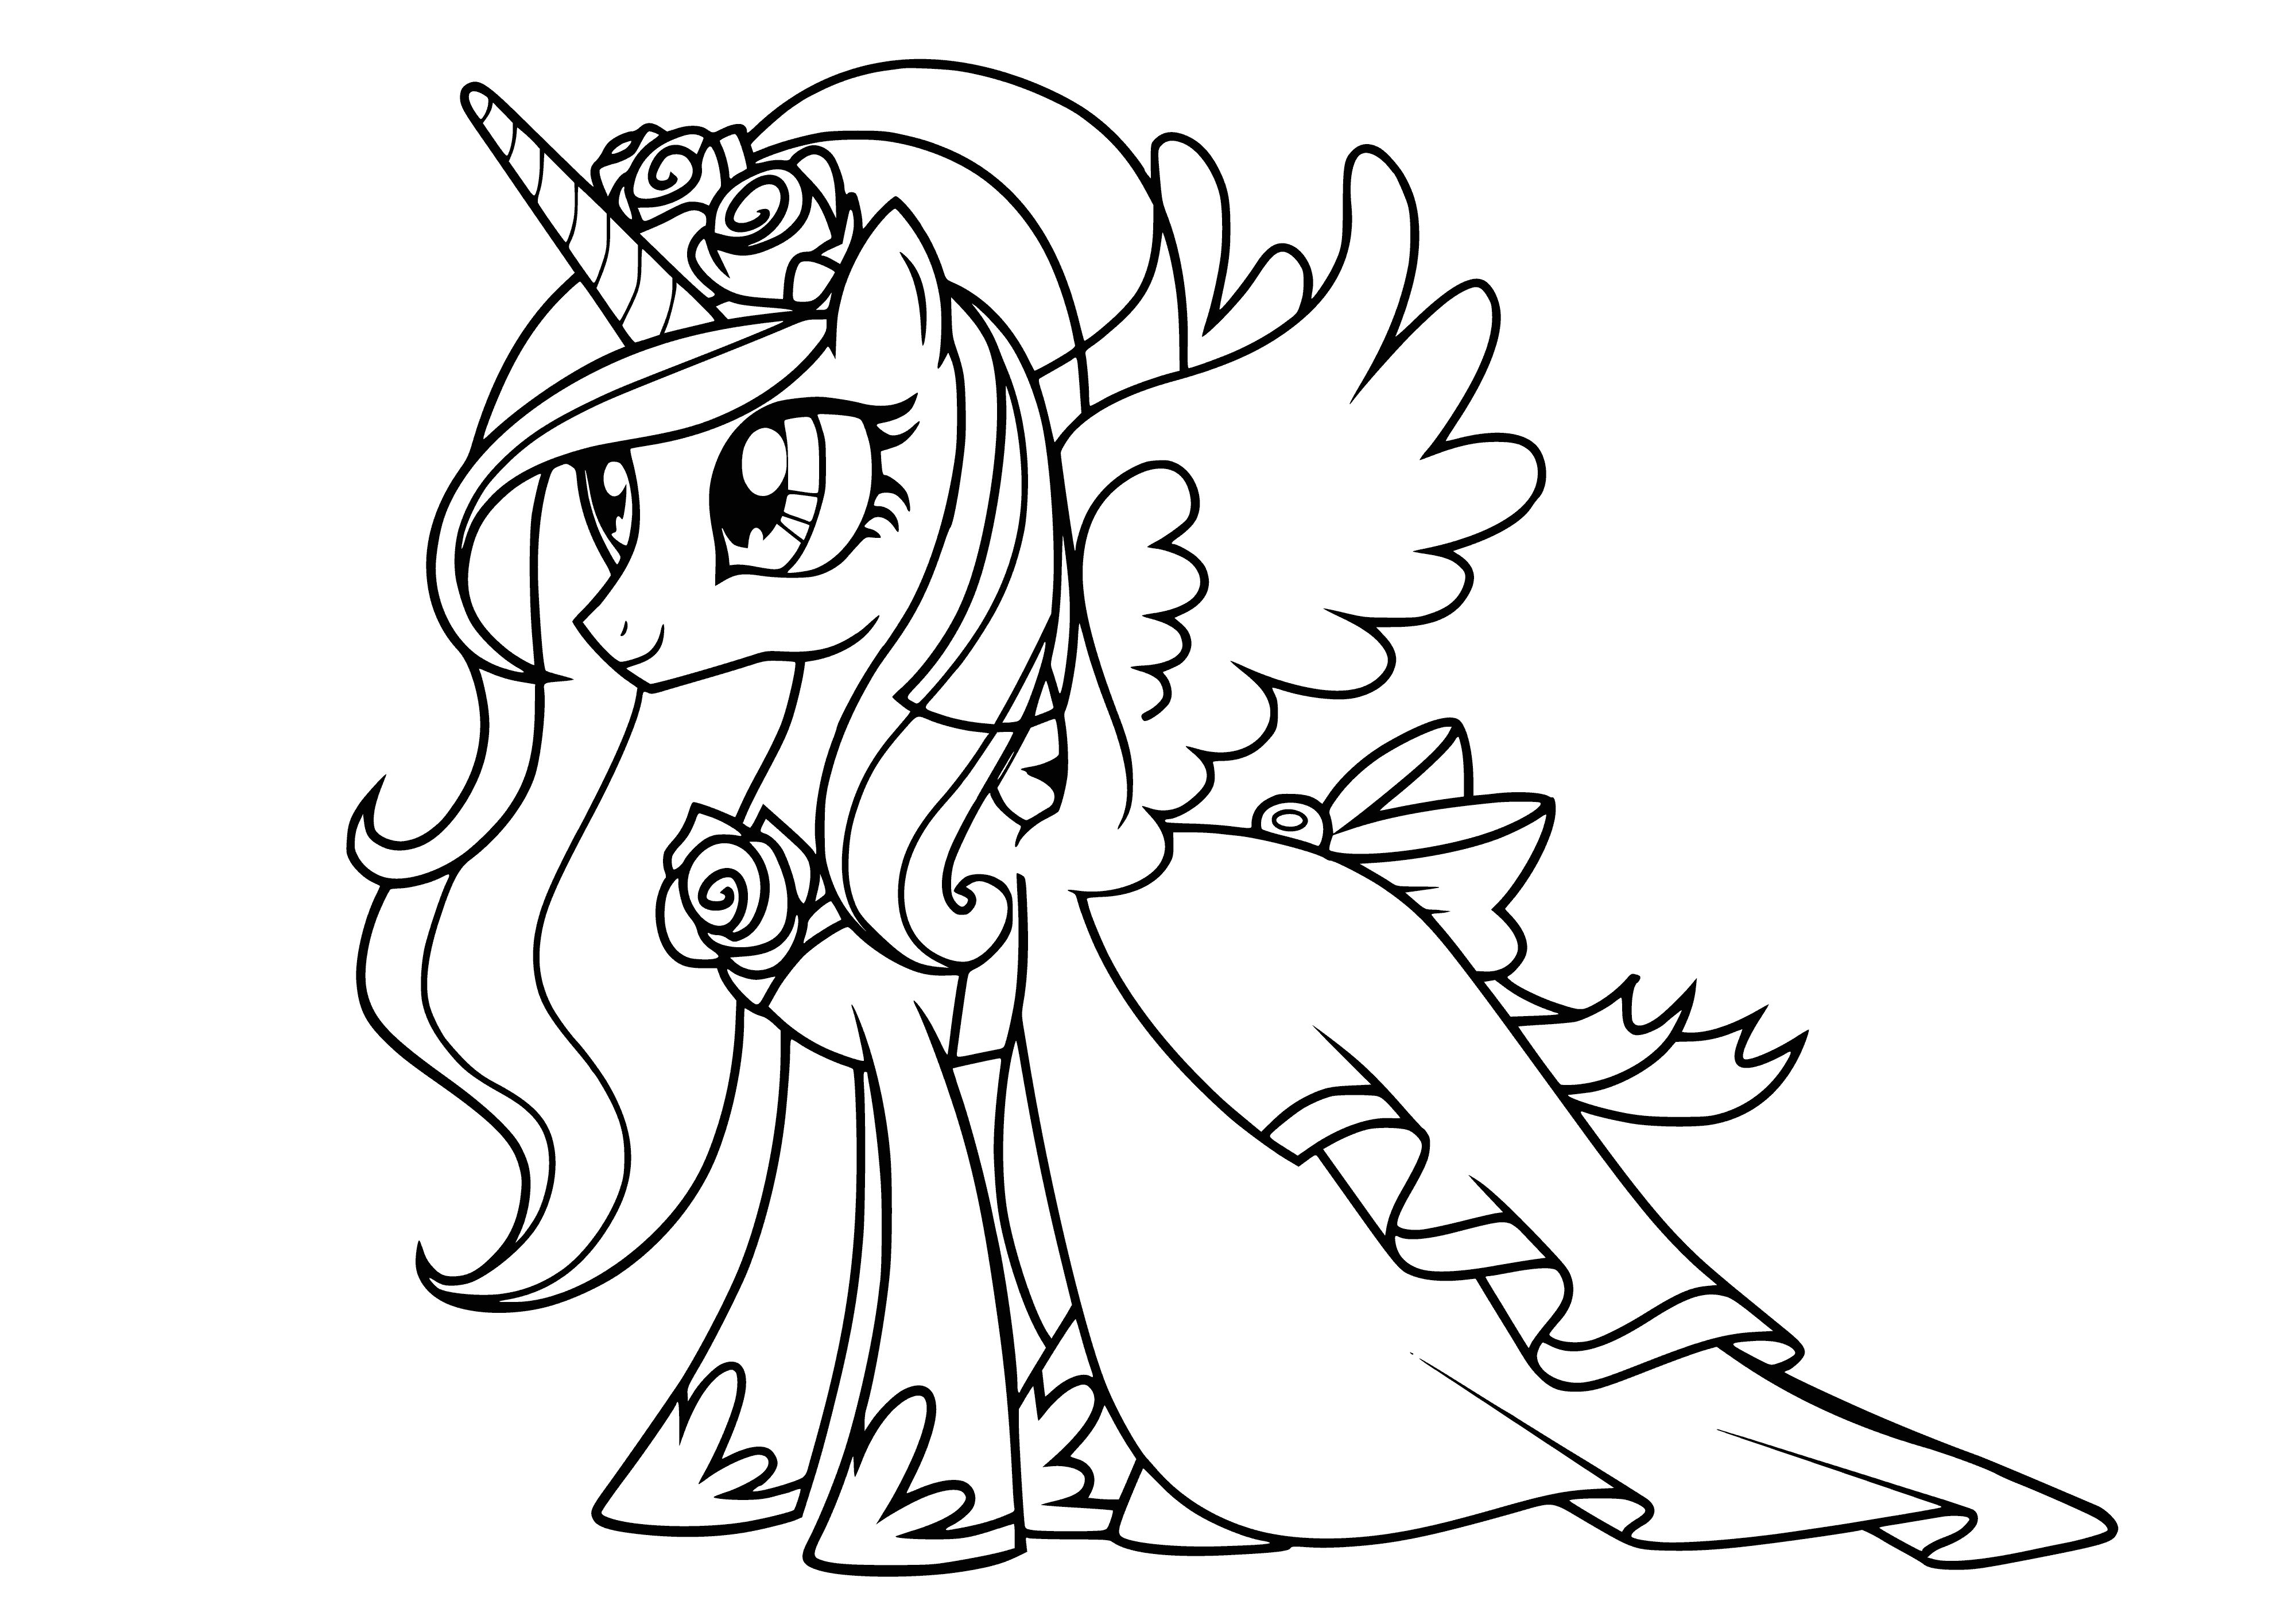 Blonde princess with pink dress, crown, wand, and smile on face in coloring page.